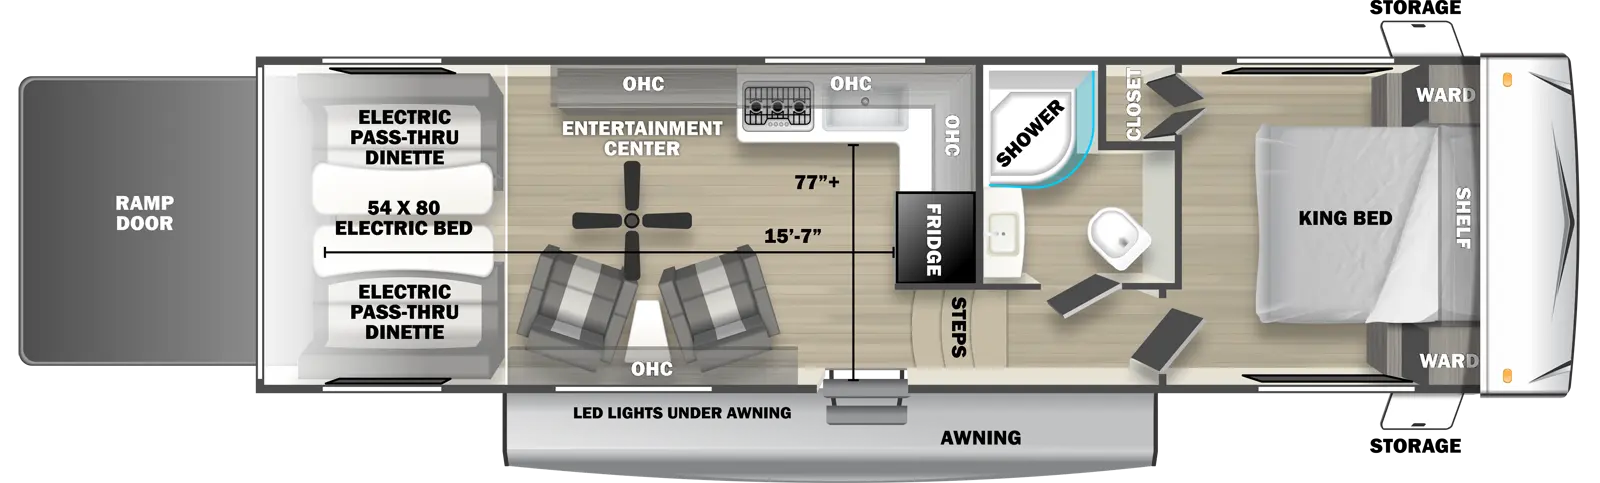 The 2710RLX fifth wheel has no slide outs, 1 entry door and 1 rear ramp door. Exterior features include an awning with LED lights and front opposing side storage access. Interior layout from front to back includes front bedroom with foot-facing King bed, shelf over the bed, front corner wardrobes and front facing closet; off-door side bathroom with radius shower, toilet and single sink vanity; 3 steps down into the kitchen area with off-door side L-shaped countertop, stovetop, L-Shaped overhead cabinets, sink and rear facing refrigerator; 2 door side recliners with end table; ceiling fan; off-door side entertainment center with overhead cabinet; and rear 54 x 80 electric bed over electric pass-through dinette. Cargo length from rear of unit to refrigerator is 15 ft. 7 in. Cargo width from countertop to door side wall is 77 inches.